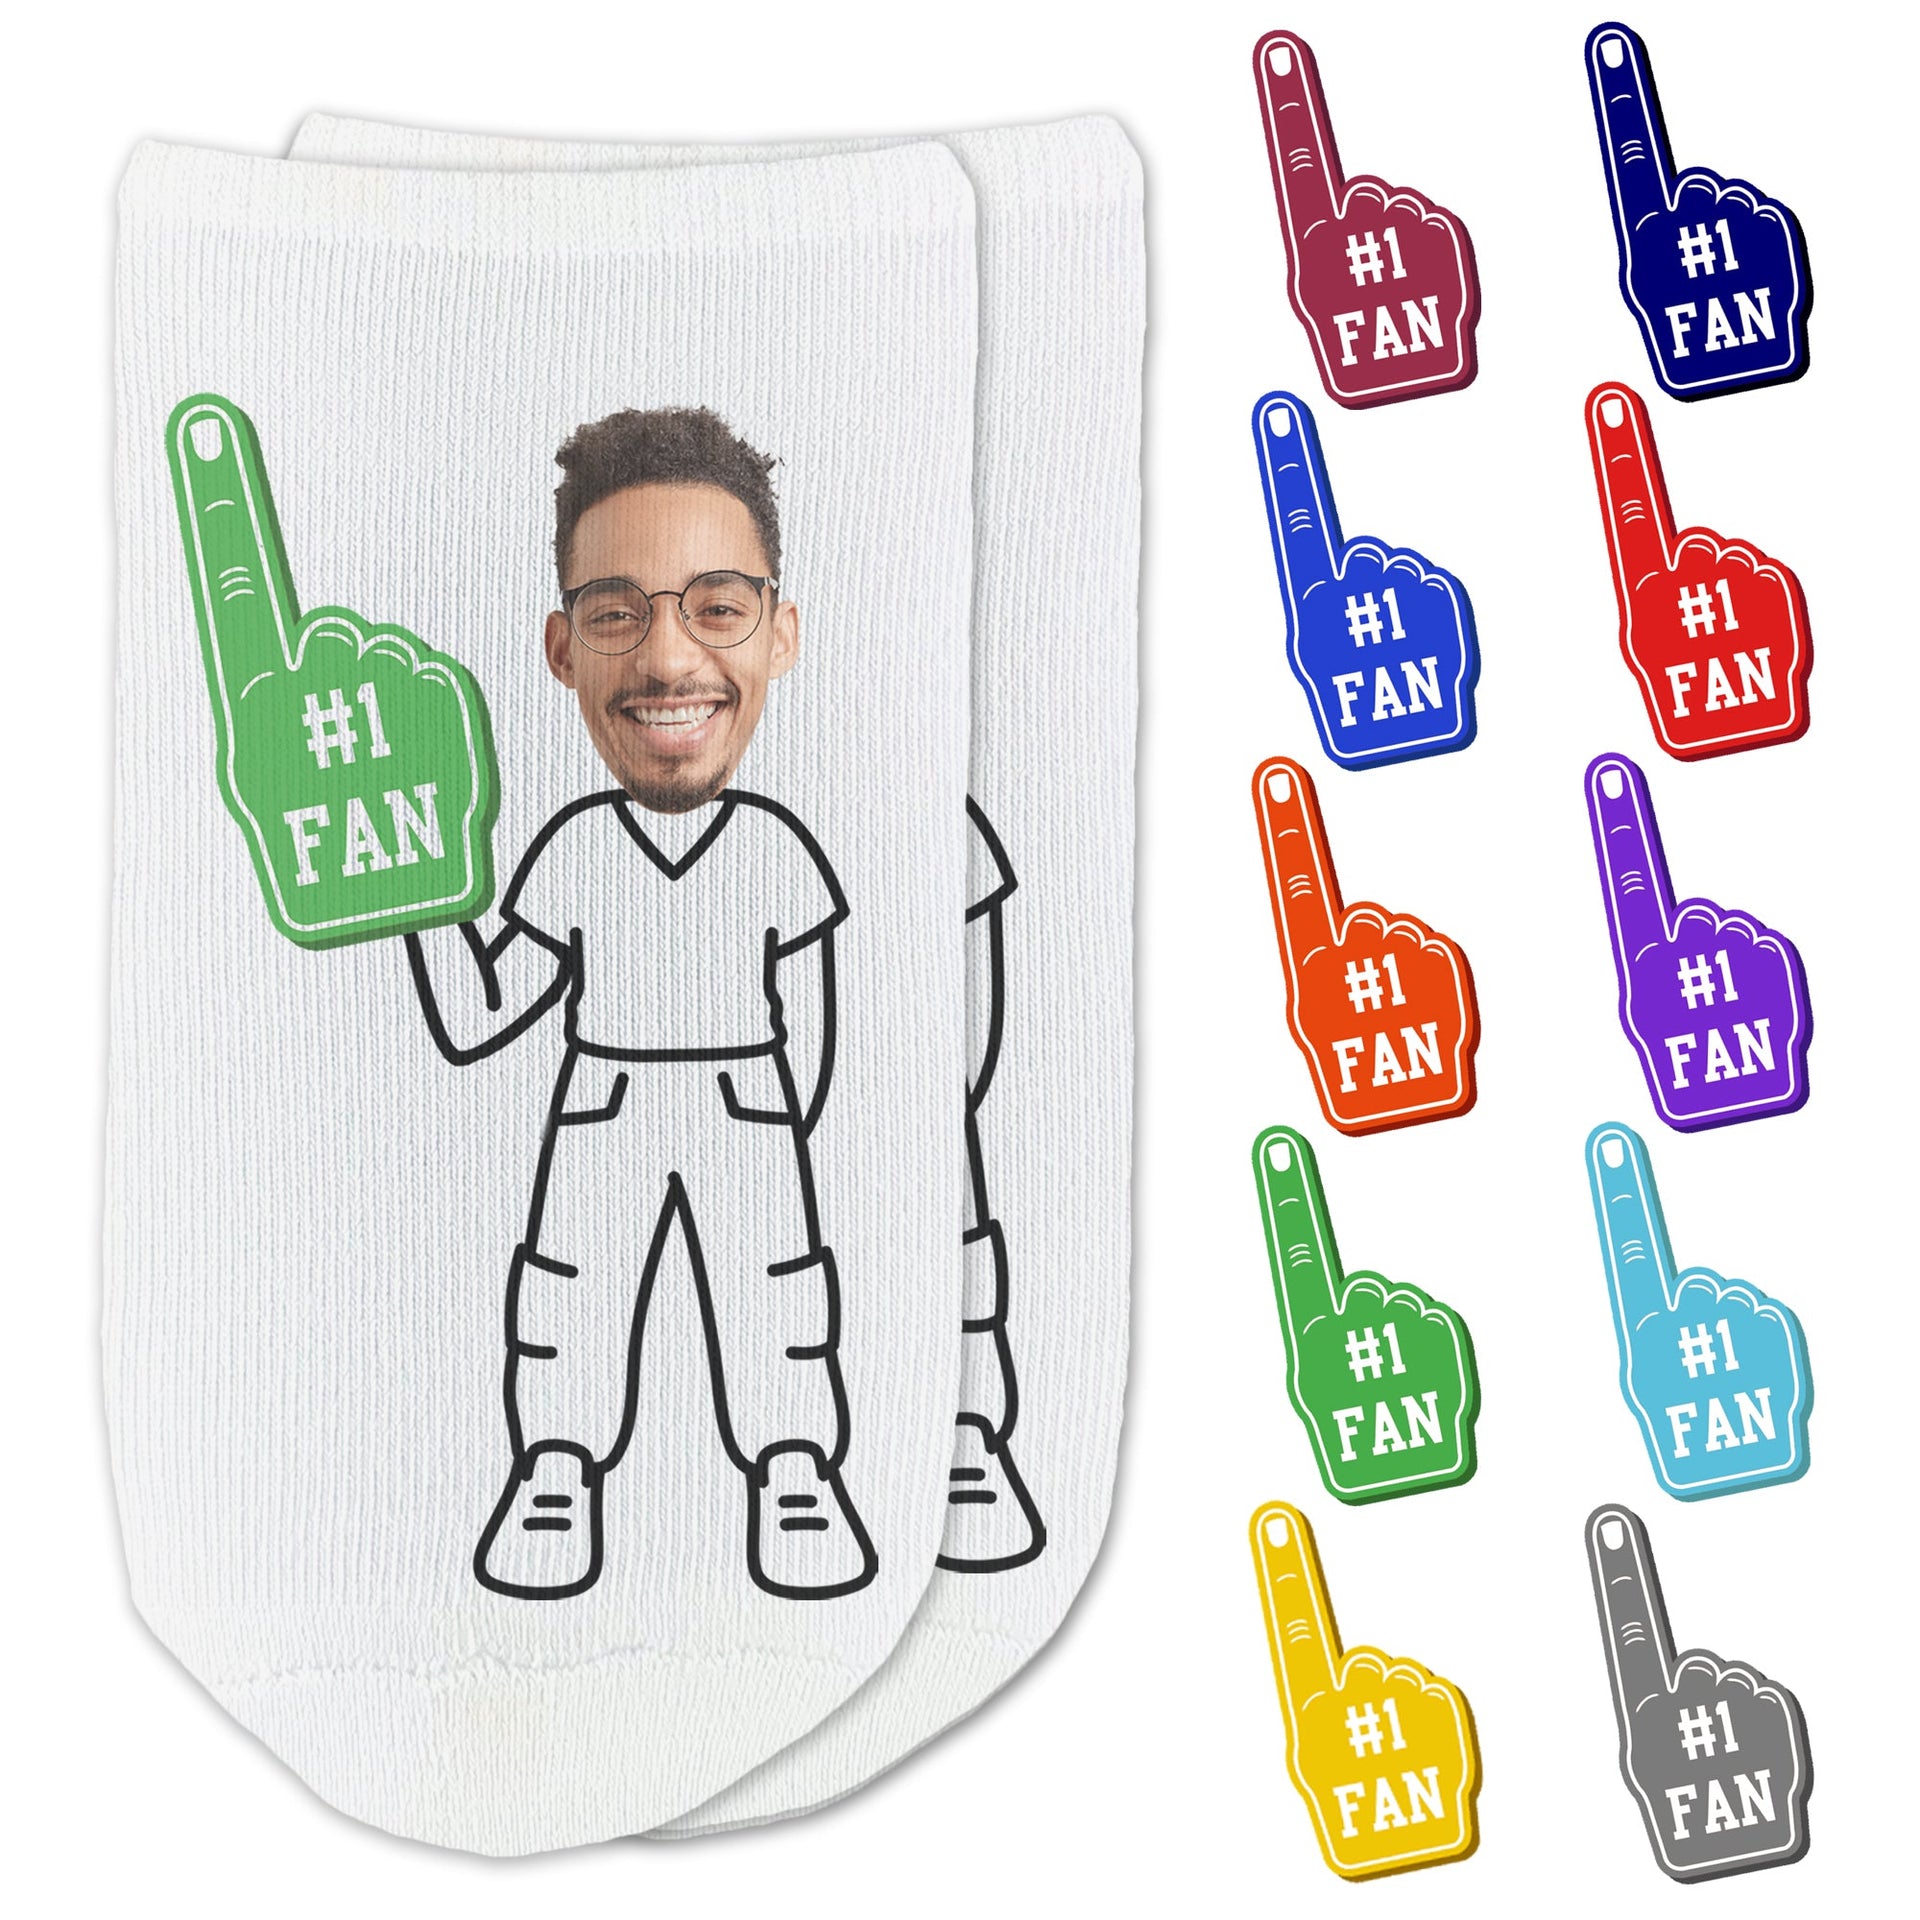 Custom printed #1 fan foam finger design with your cropped photo face on a character clothing you select digitally printed on white cotton no show socks.